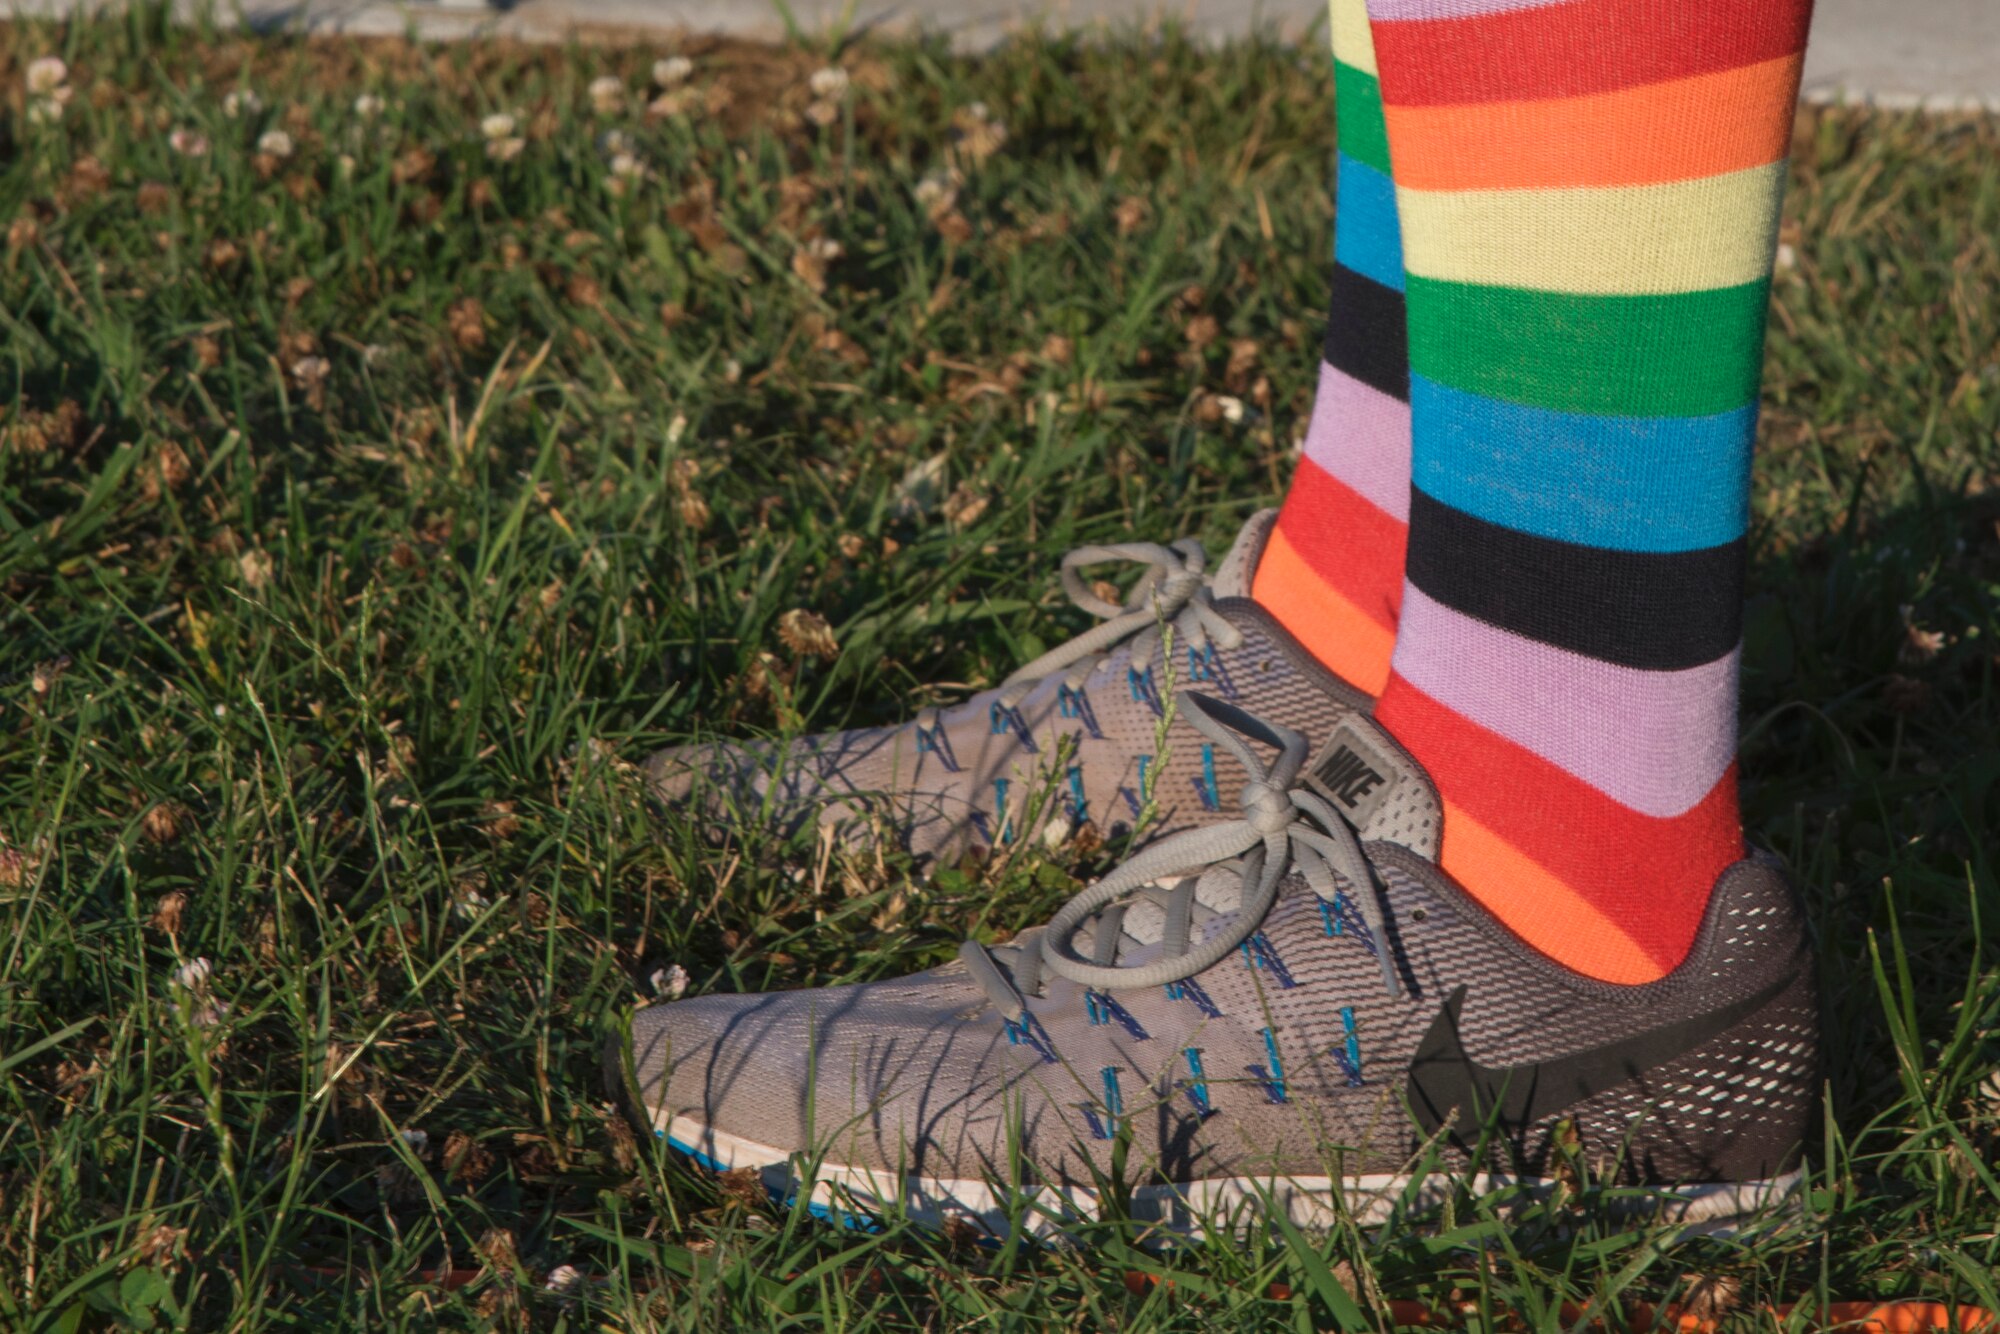 A base member wears rainbow socks during the Lesbian, Gay, Bisexual and Transgender Pride Month Five Kilometer Pride Run at Joint Base Andrews, Md., June 28, 2017. A common symbol of LGBT pride is the rainbow or pride flag.  (U.S. Air Force photo by Airman 1st Class Valentina Lopez)